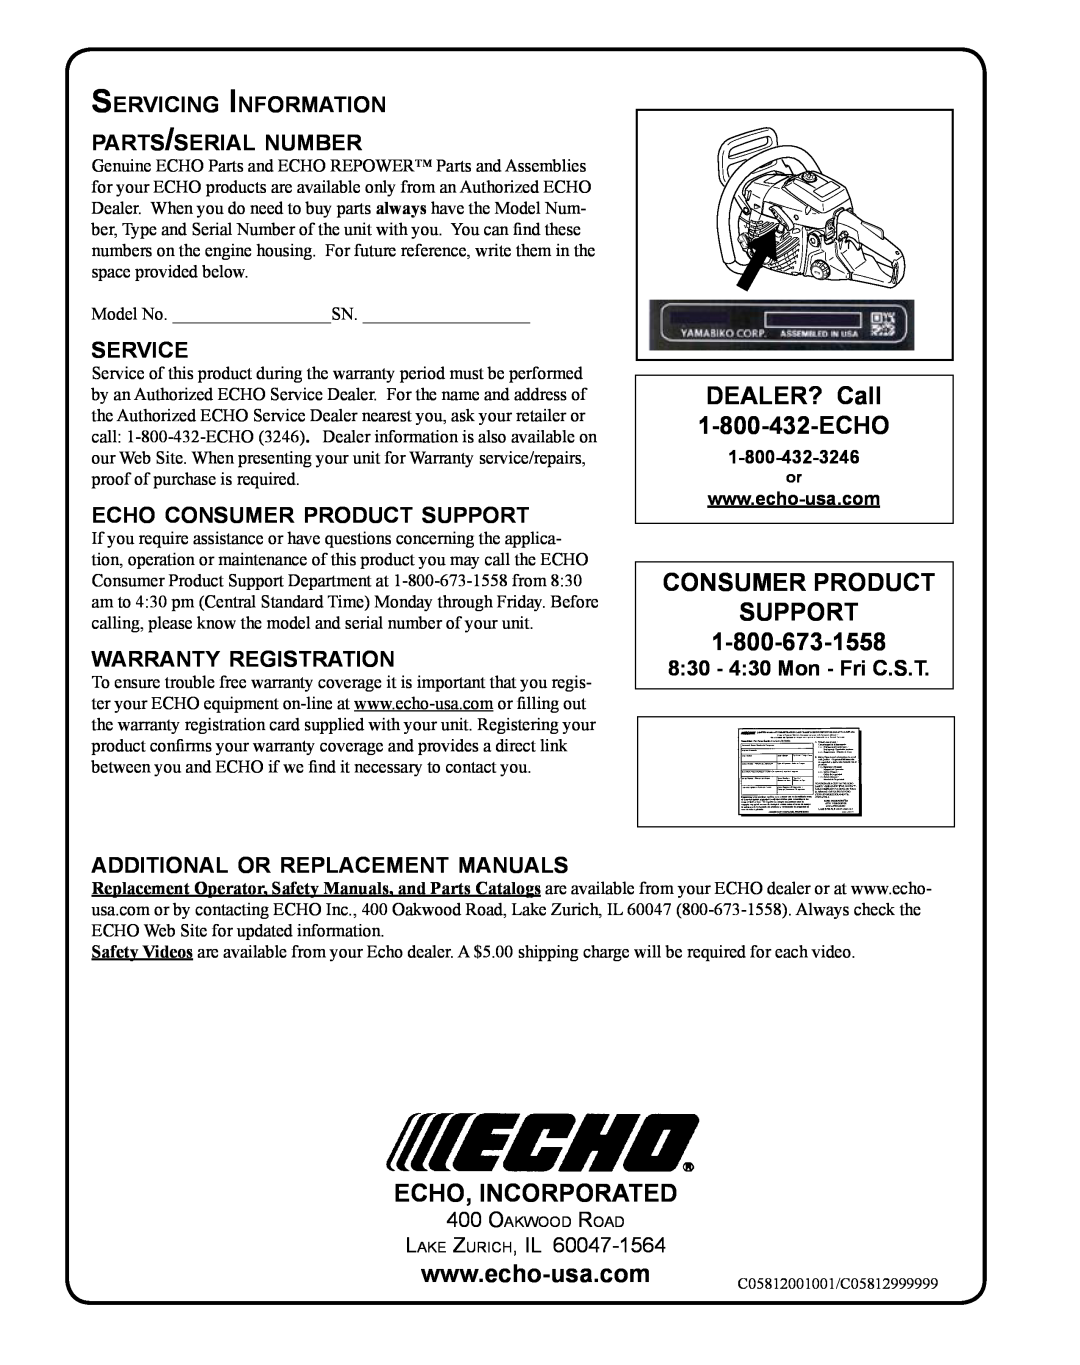 Echo X7503196704 DEALER? Call 1-800-432-ECHO, Consumer Product Support, Echo, Incorporated, service, warranty registration 